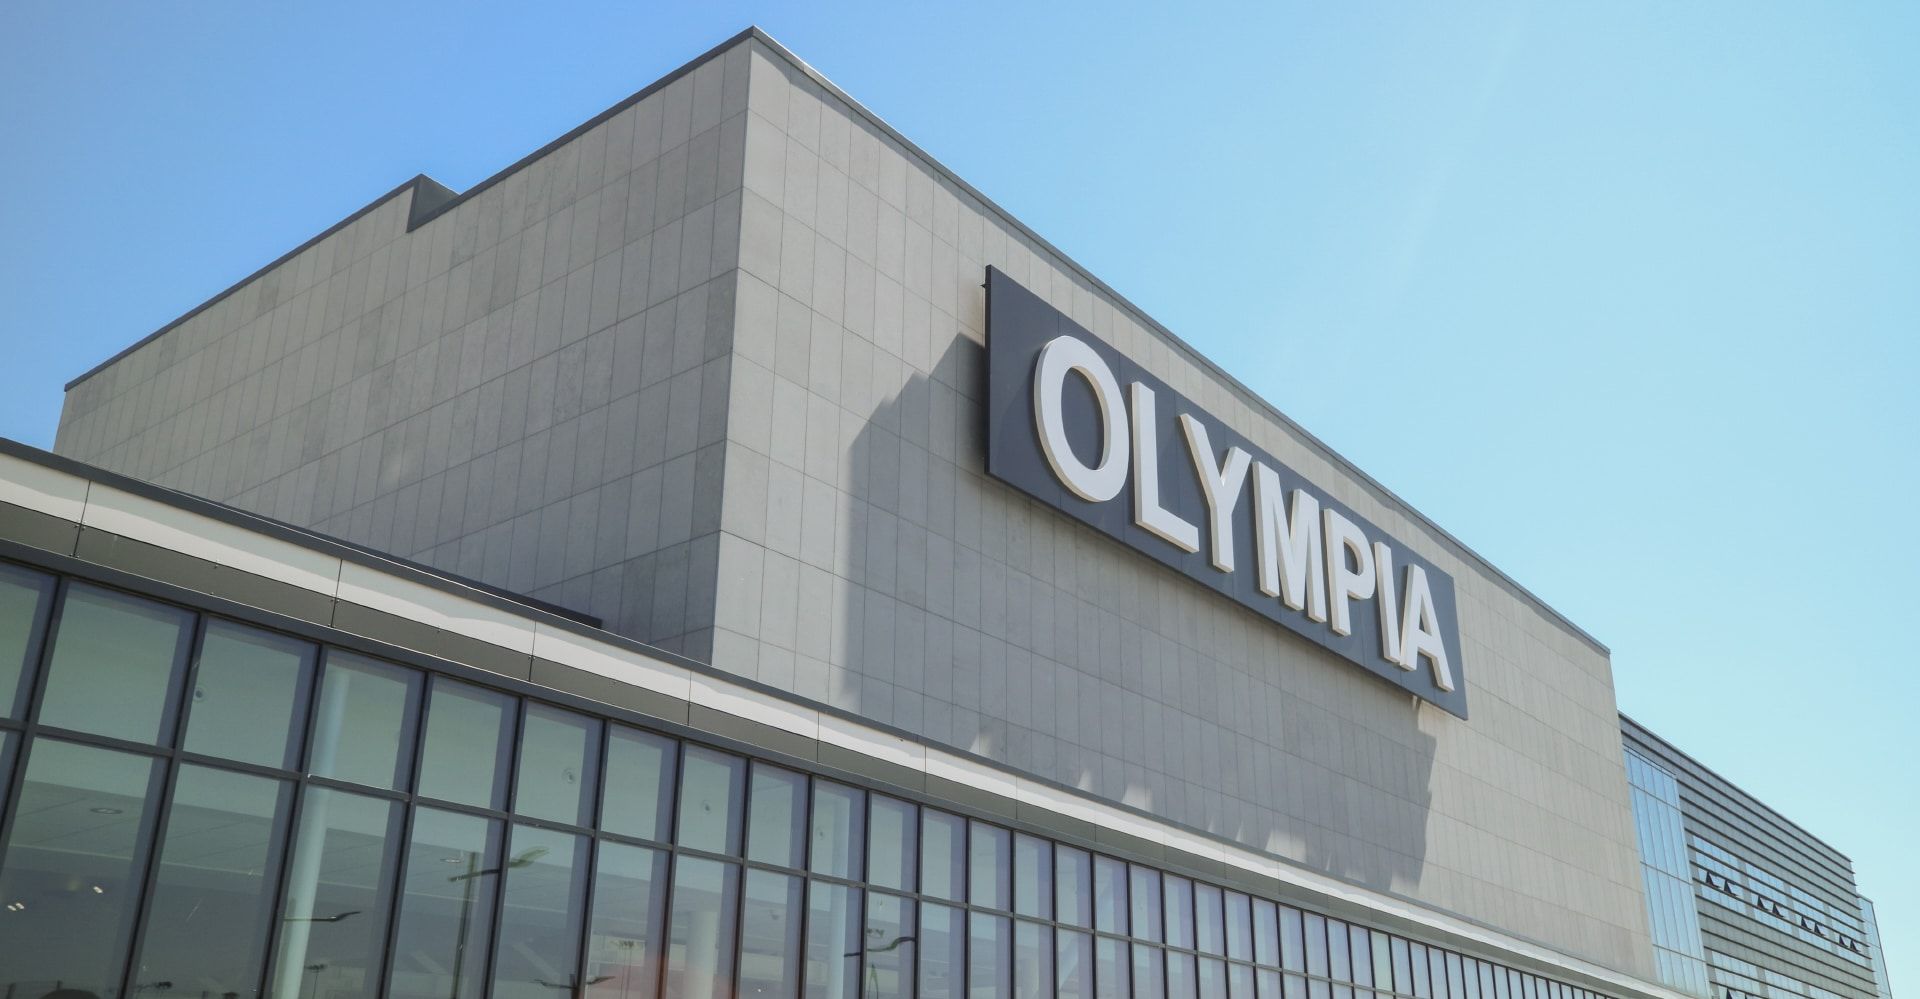 DELAYS: There have been no updates on the erection of Irish language signage at Olympia Leisure Centre for over a year